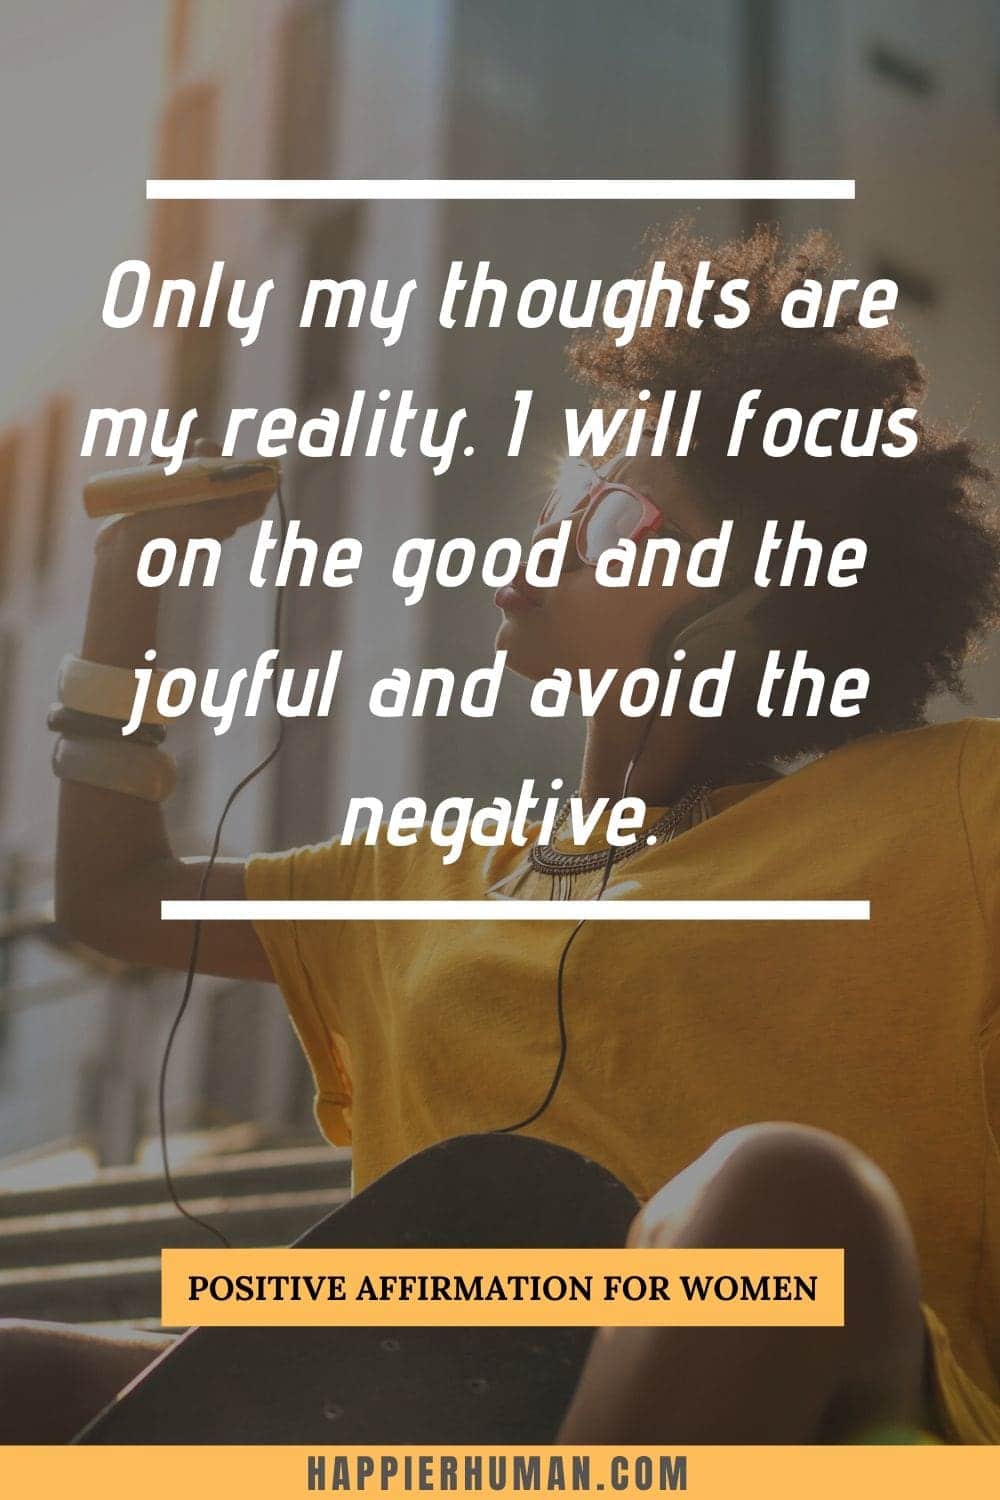 Positive Affirmations for Women - Only my thoughts are my reality. I will focus on the good and the joyful and avoid the negative. | high value woman affirmations | daily motivational affirmations | positive affirmations for self-esteem #womenaffirmations #postiveaffirmations #love